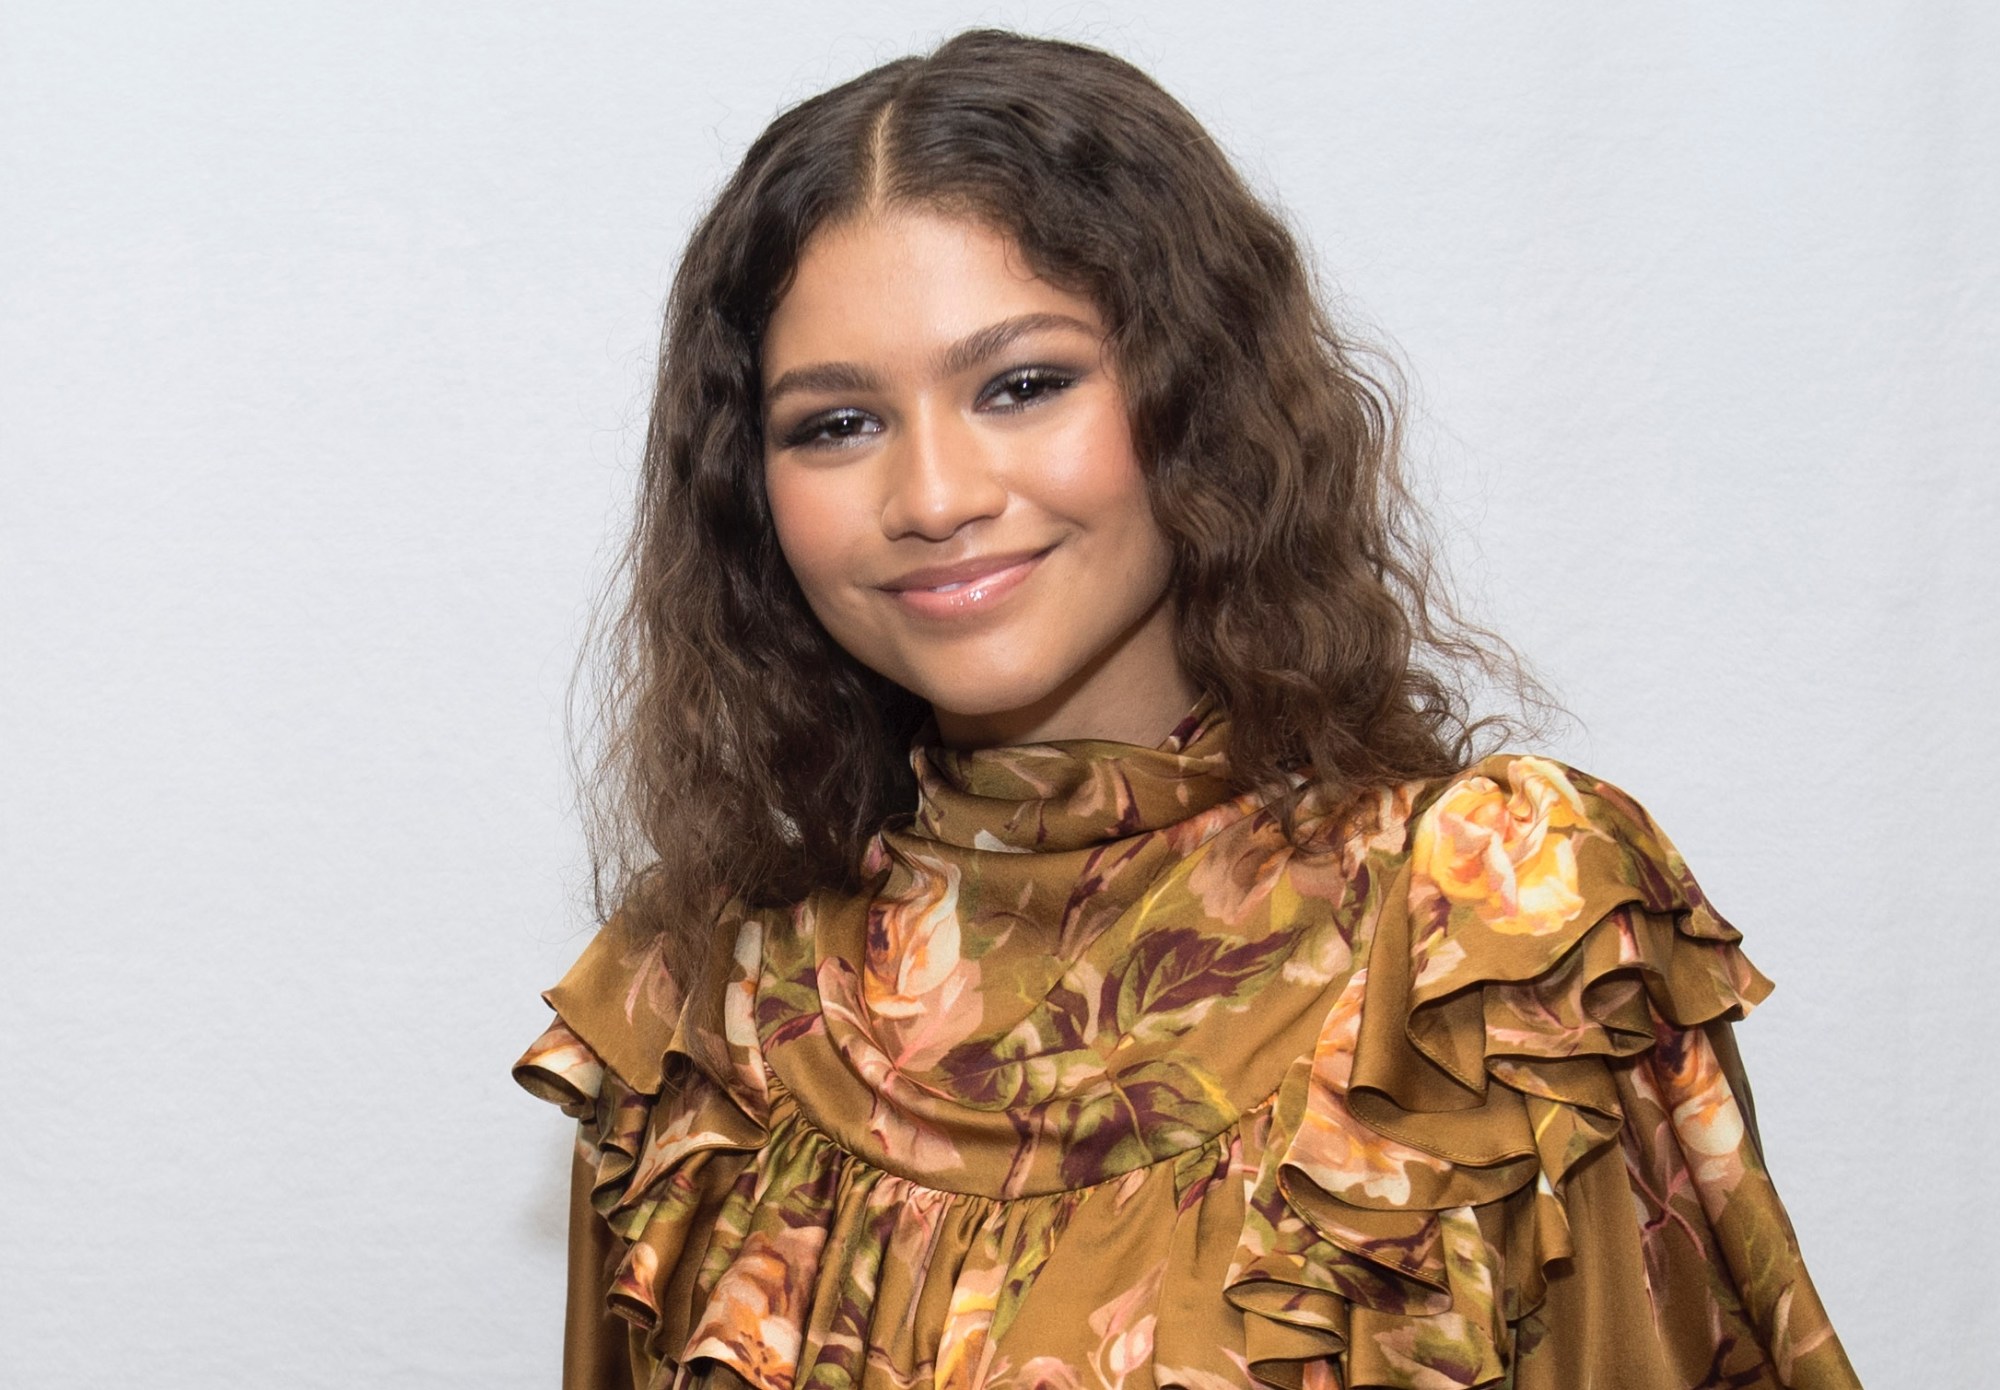 HFPA in Conversation: Zendaya On Learning How Not To Argue - Golden Globes